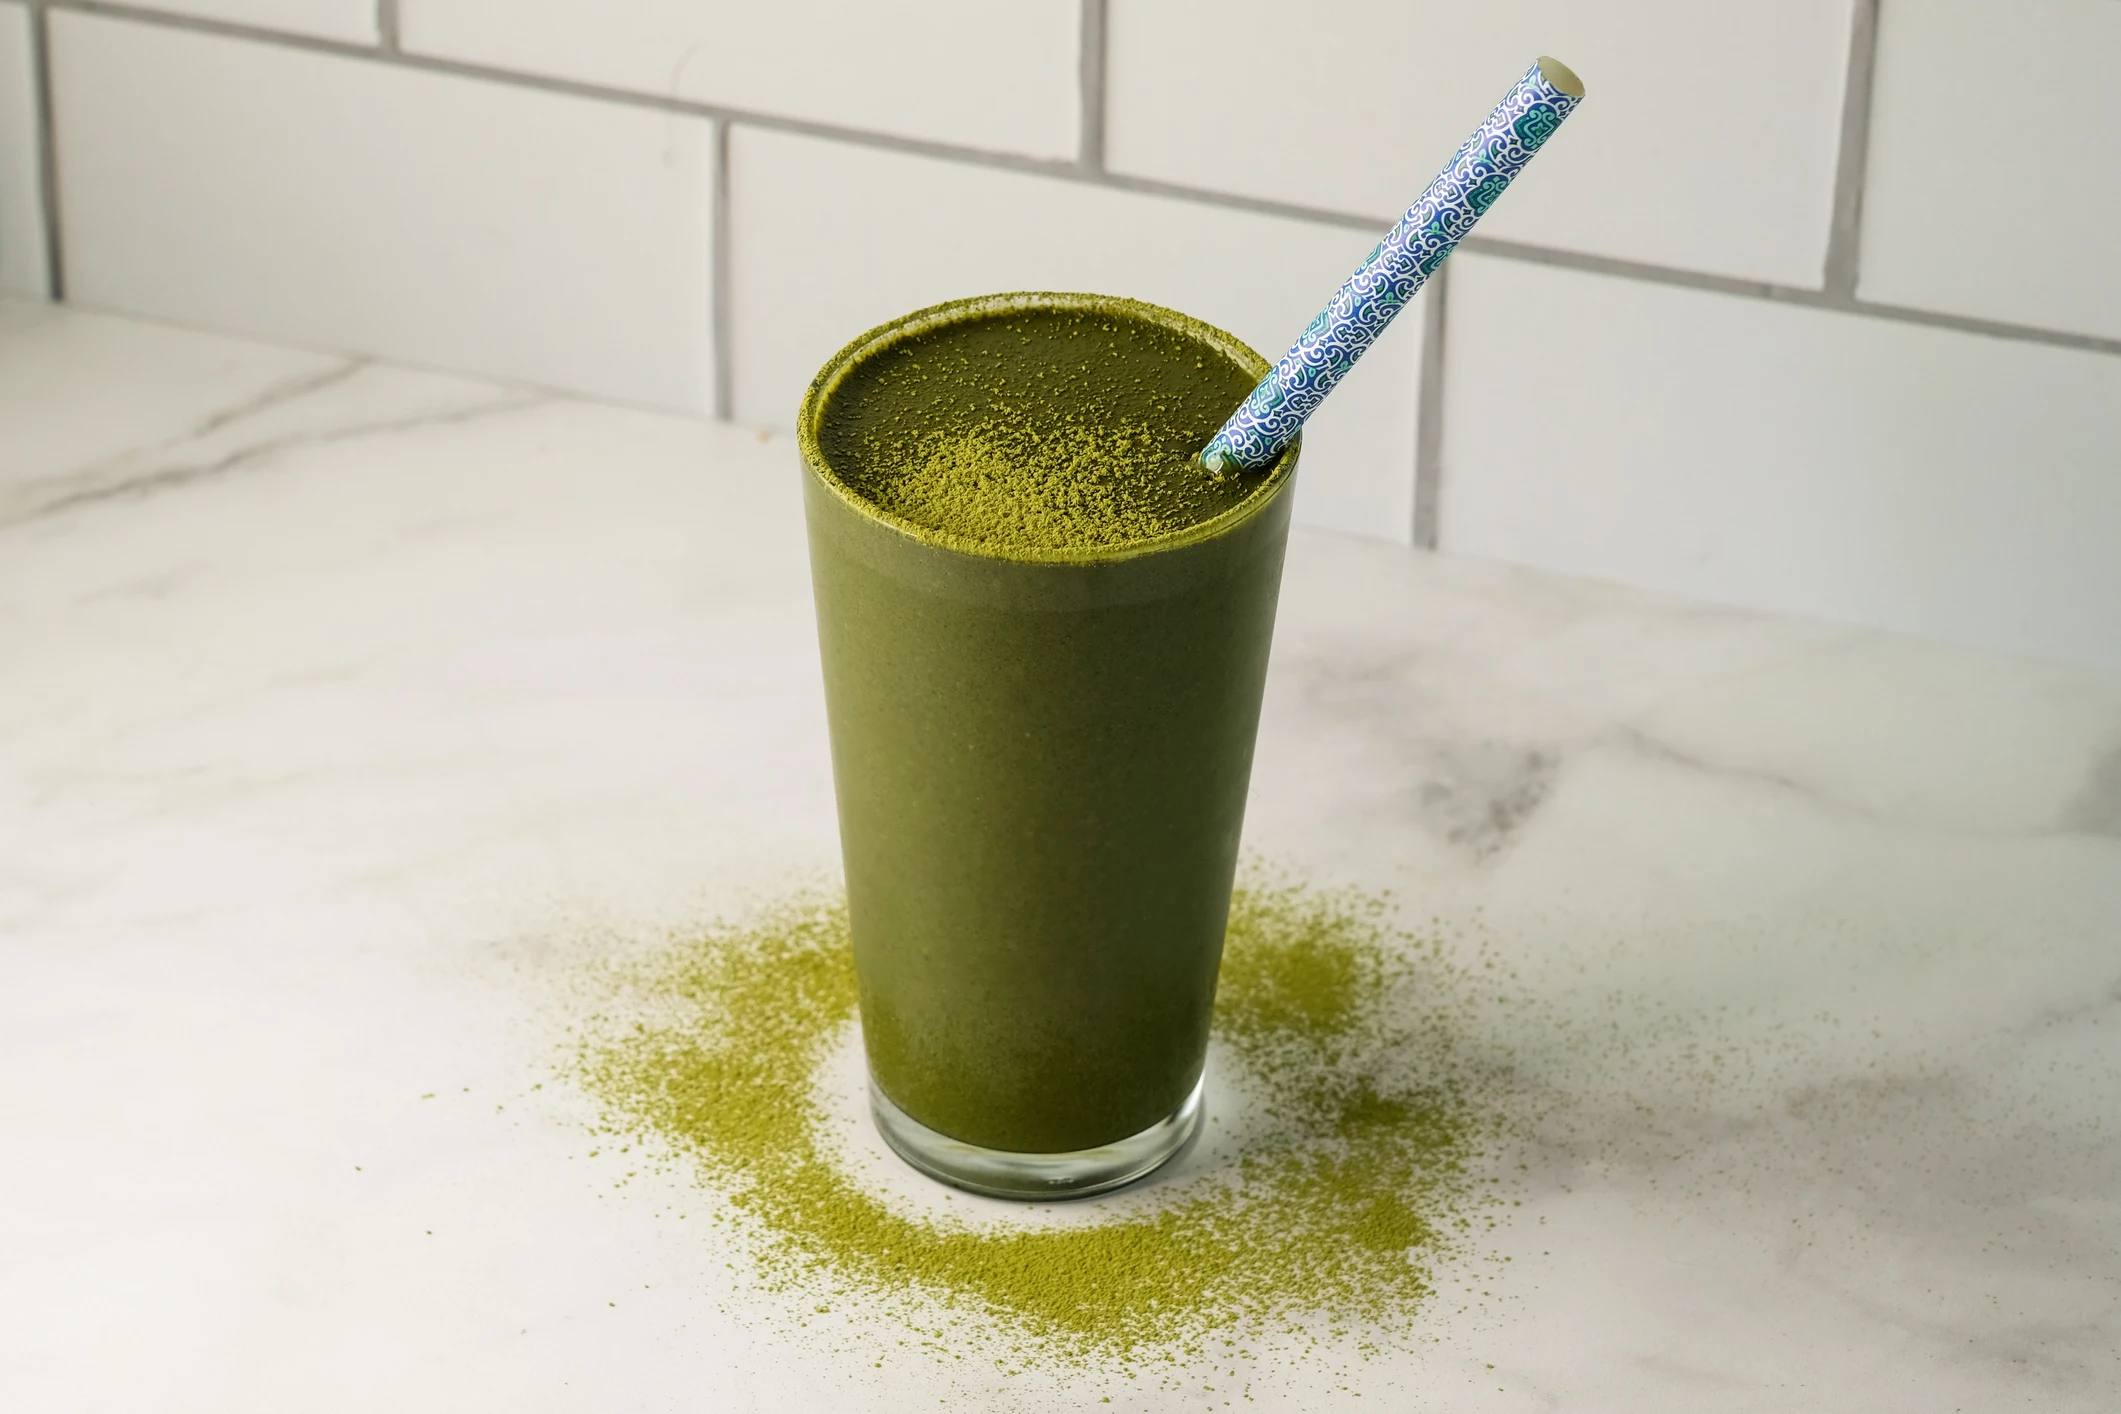 "I Took Spirulina Every Morning and Here's What Happened" | The Beet